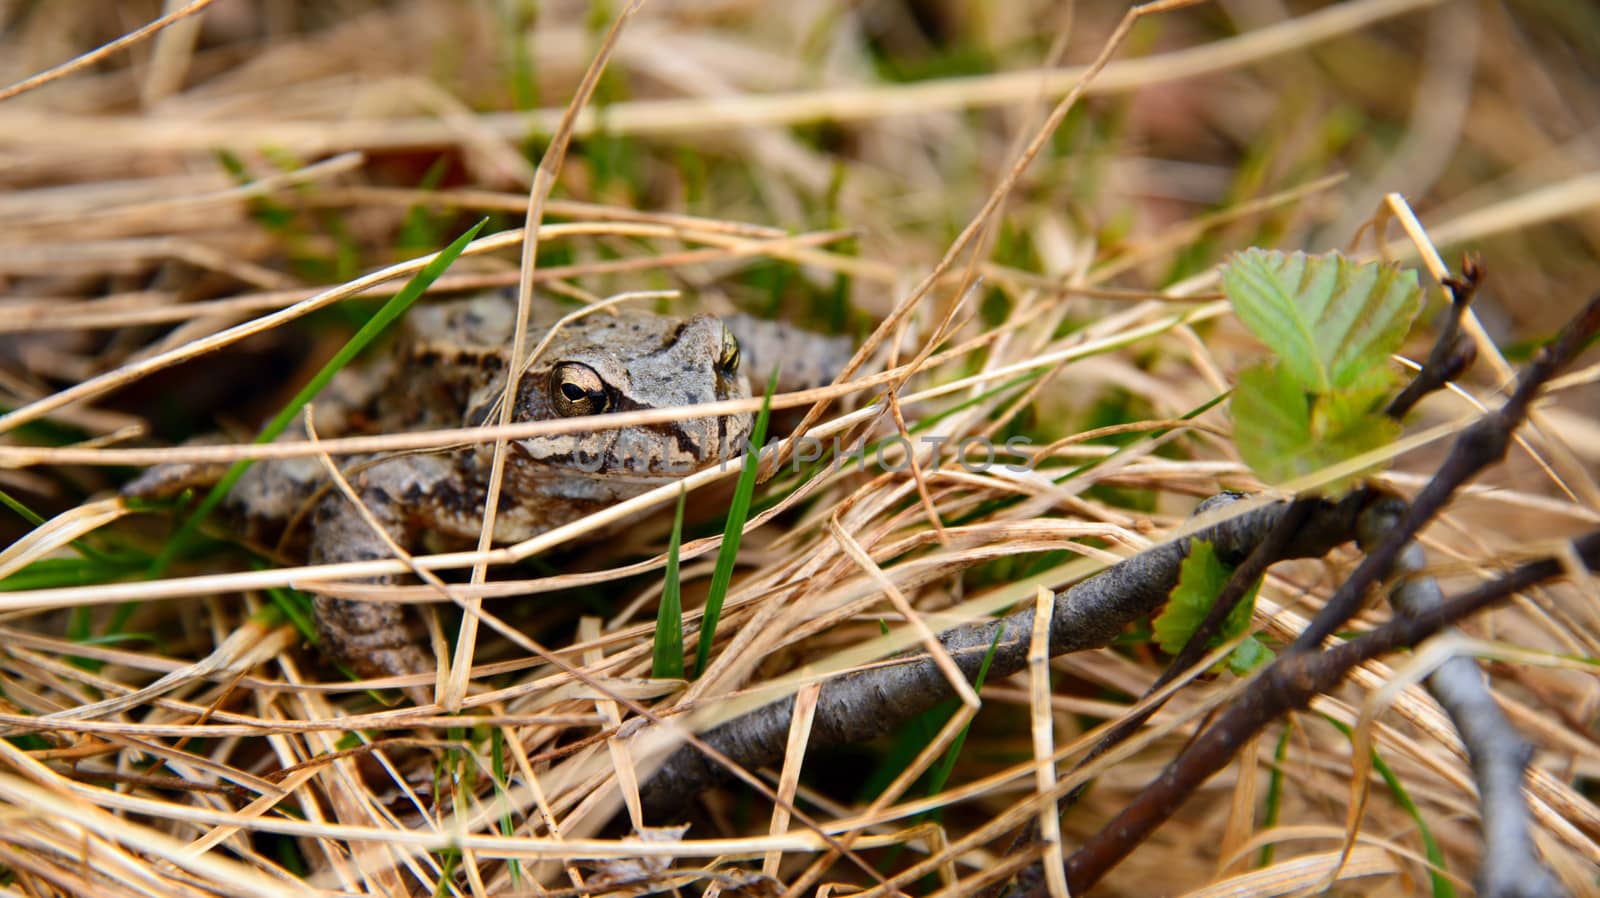 A toad hiding in withered grass